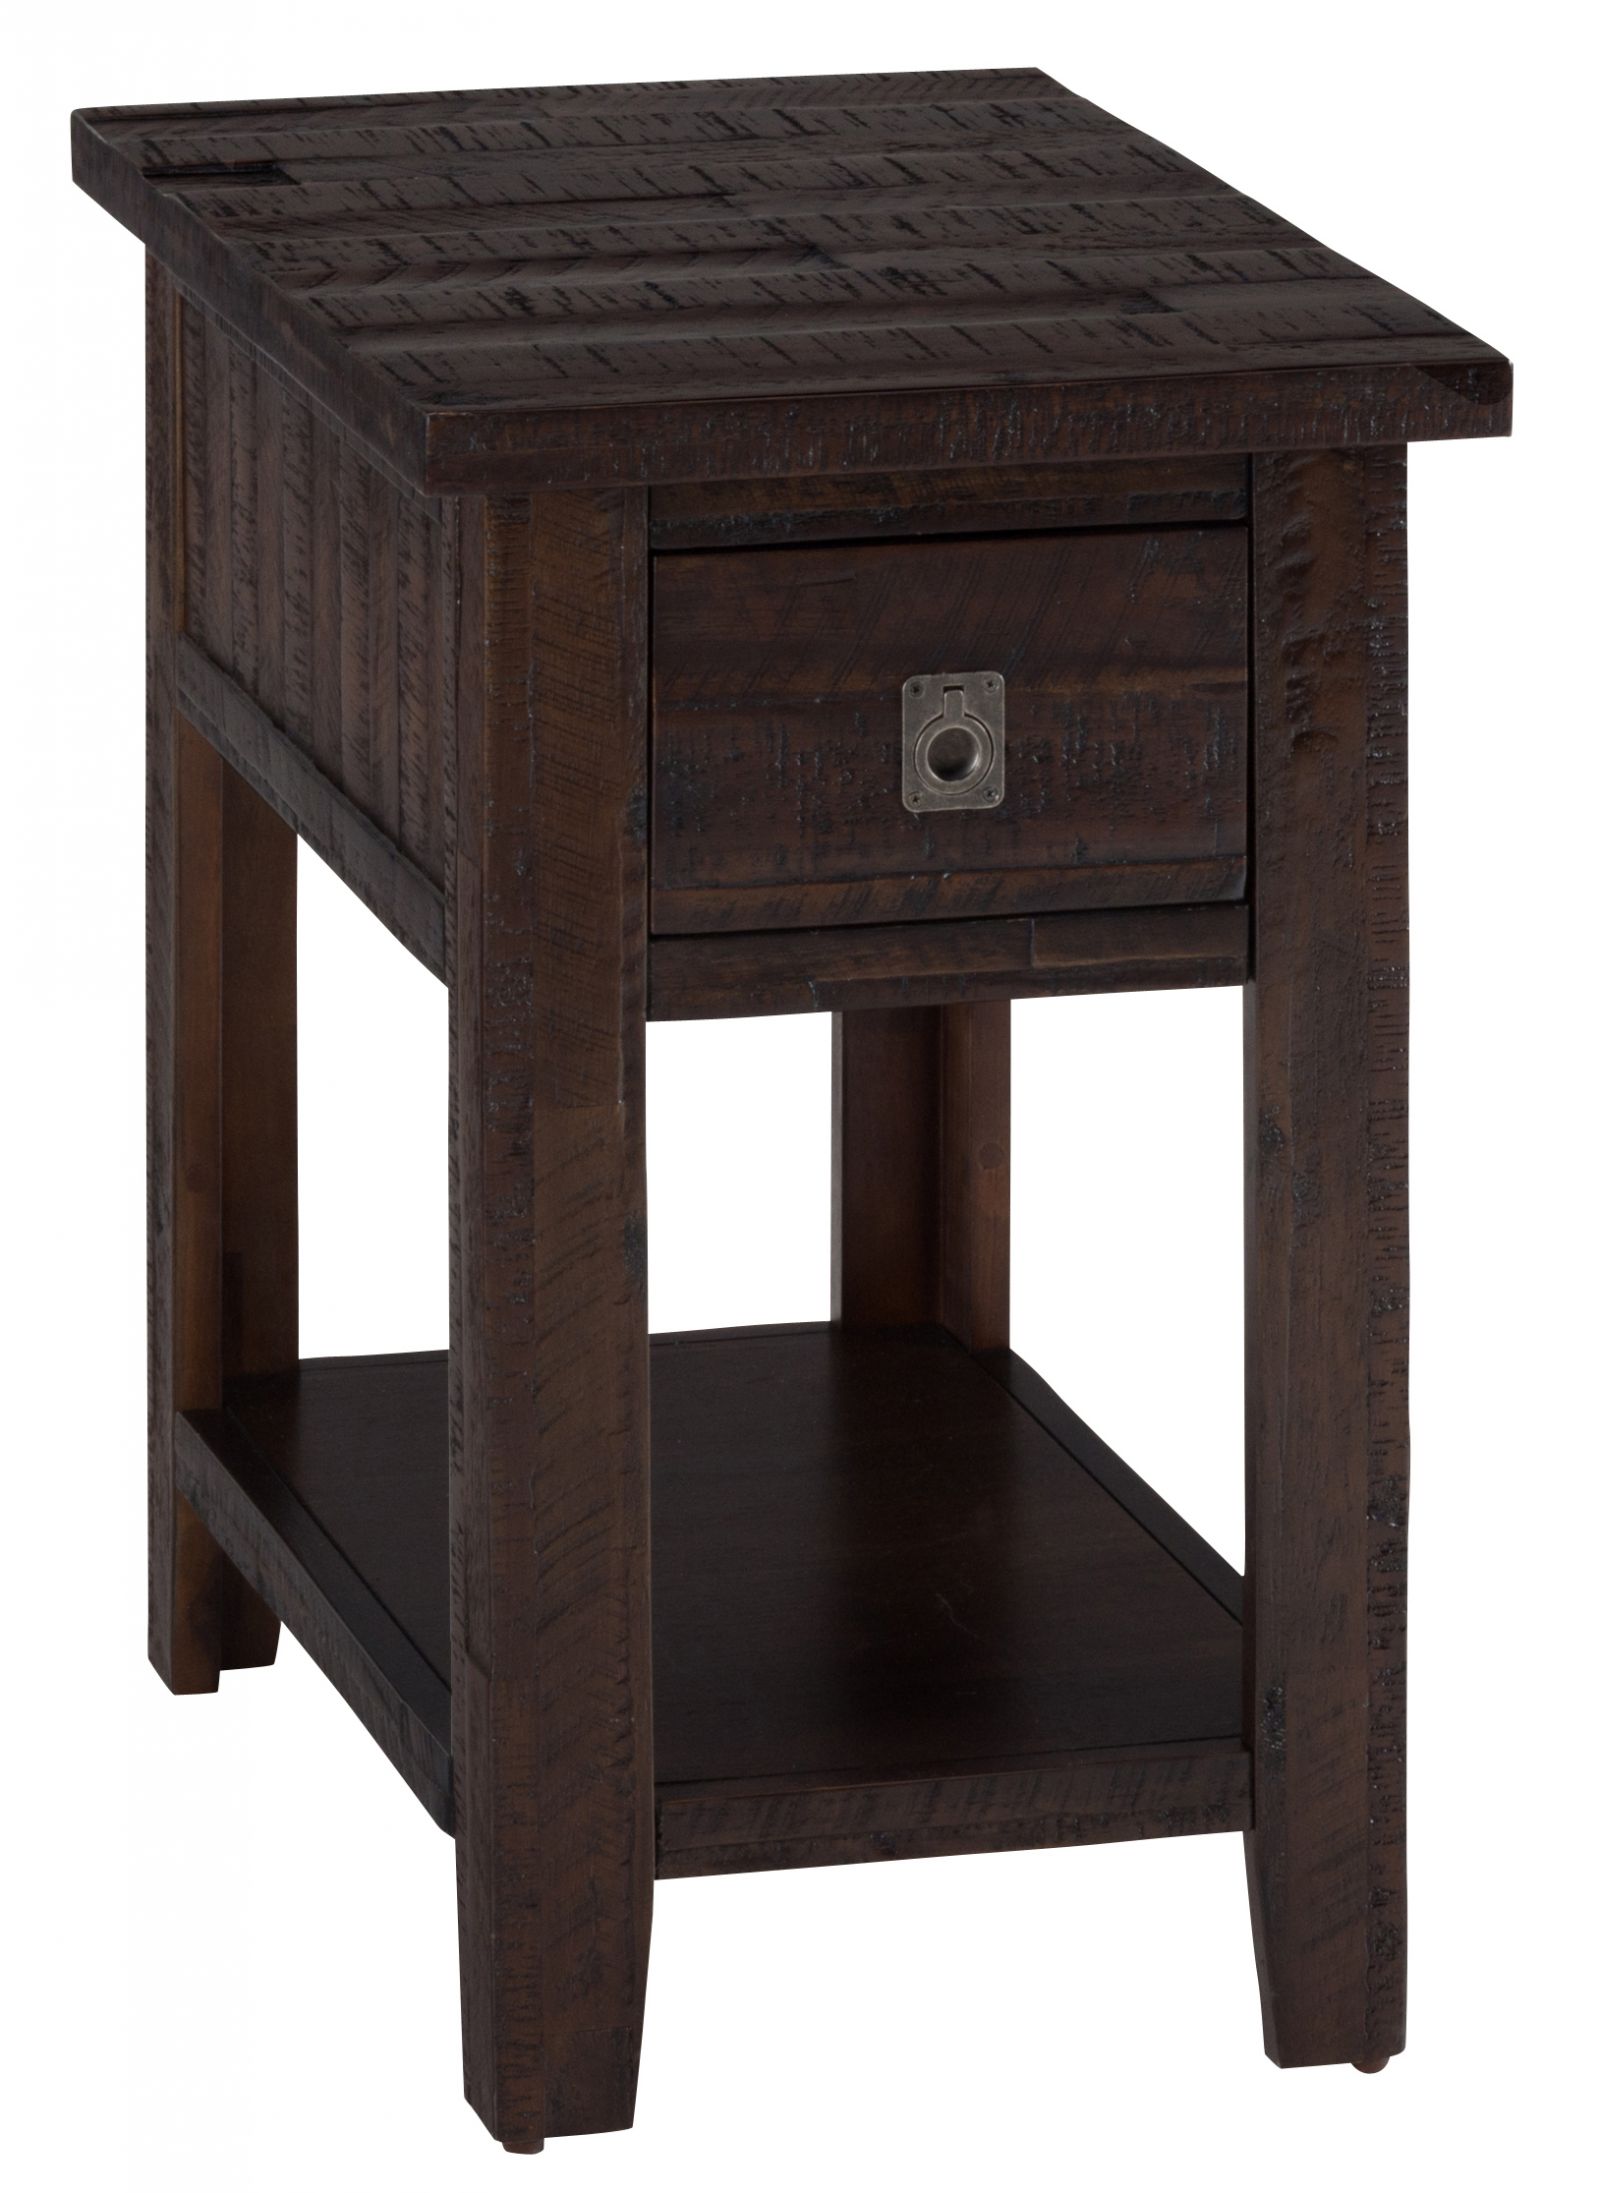 Kona Grove Chairside Table with Drawers